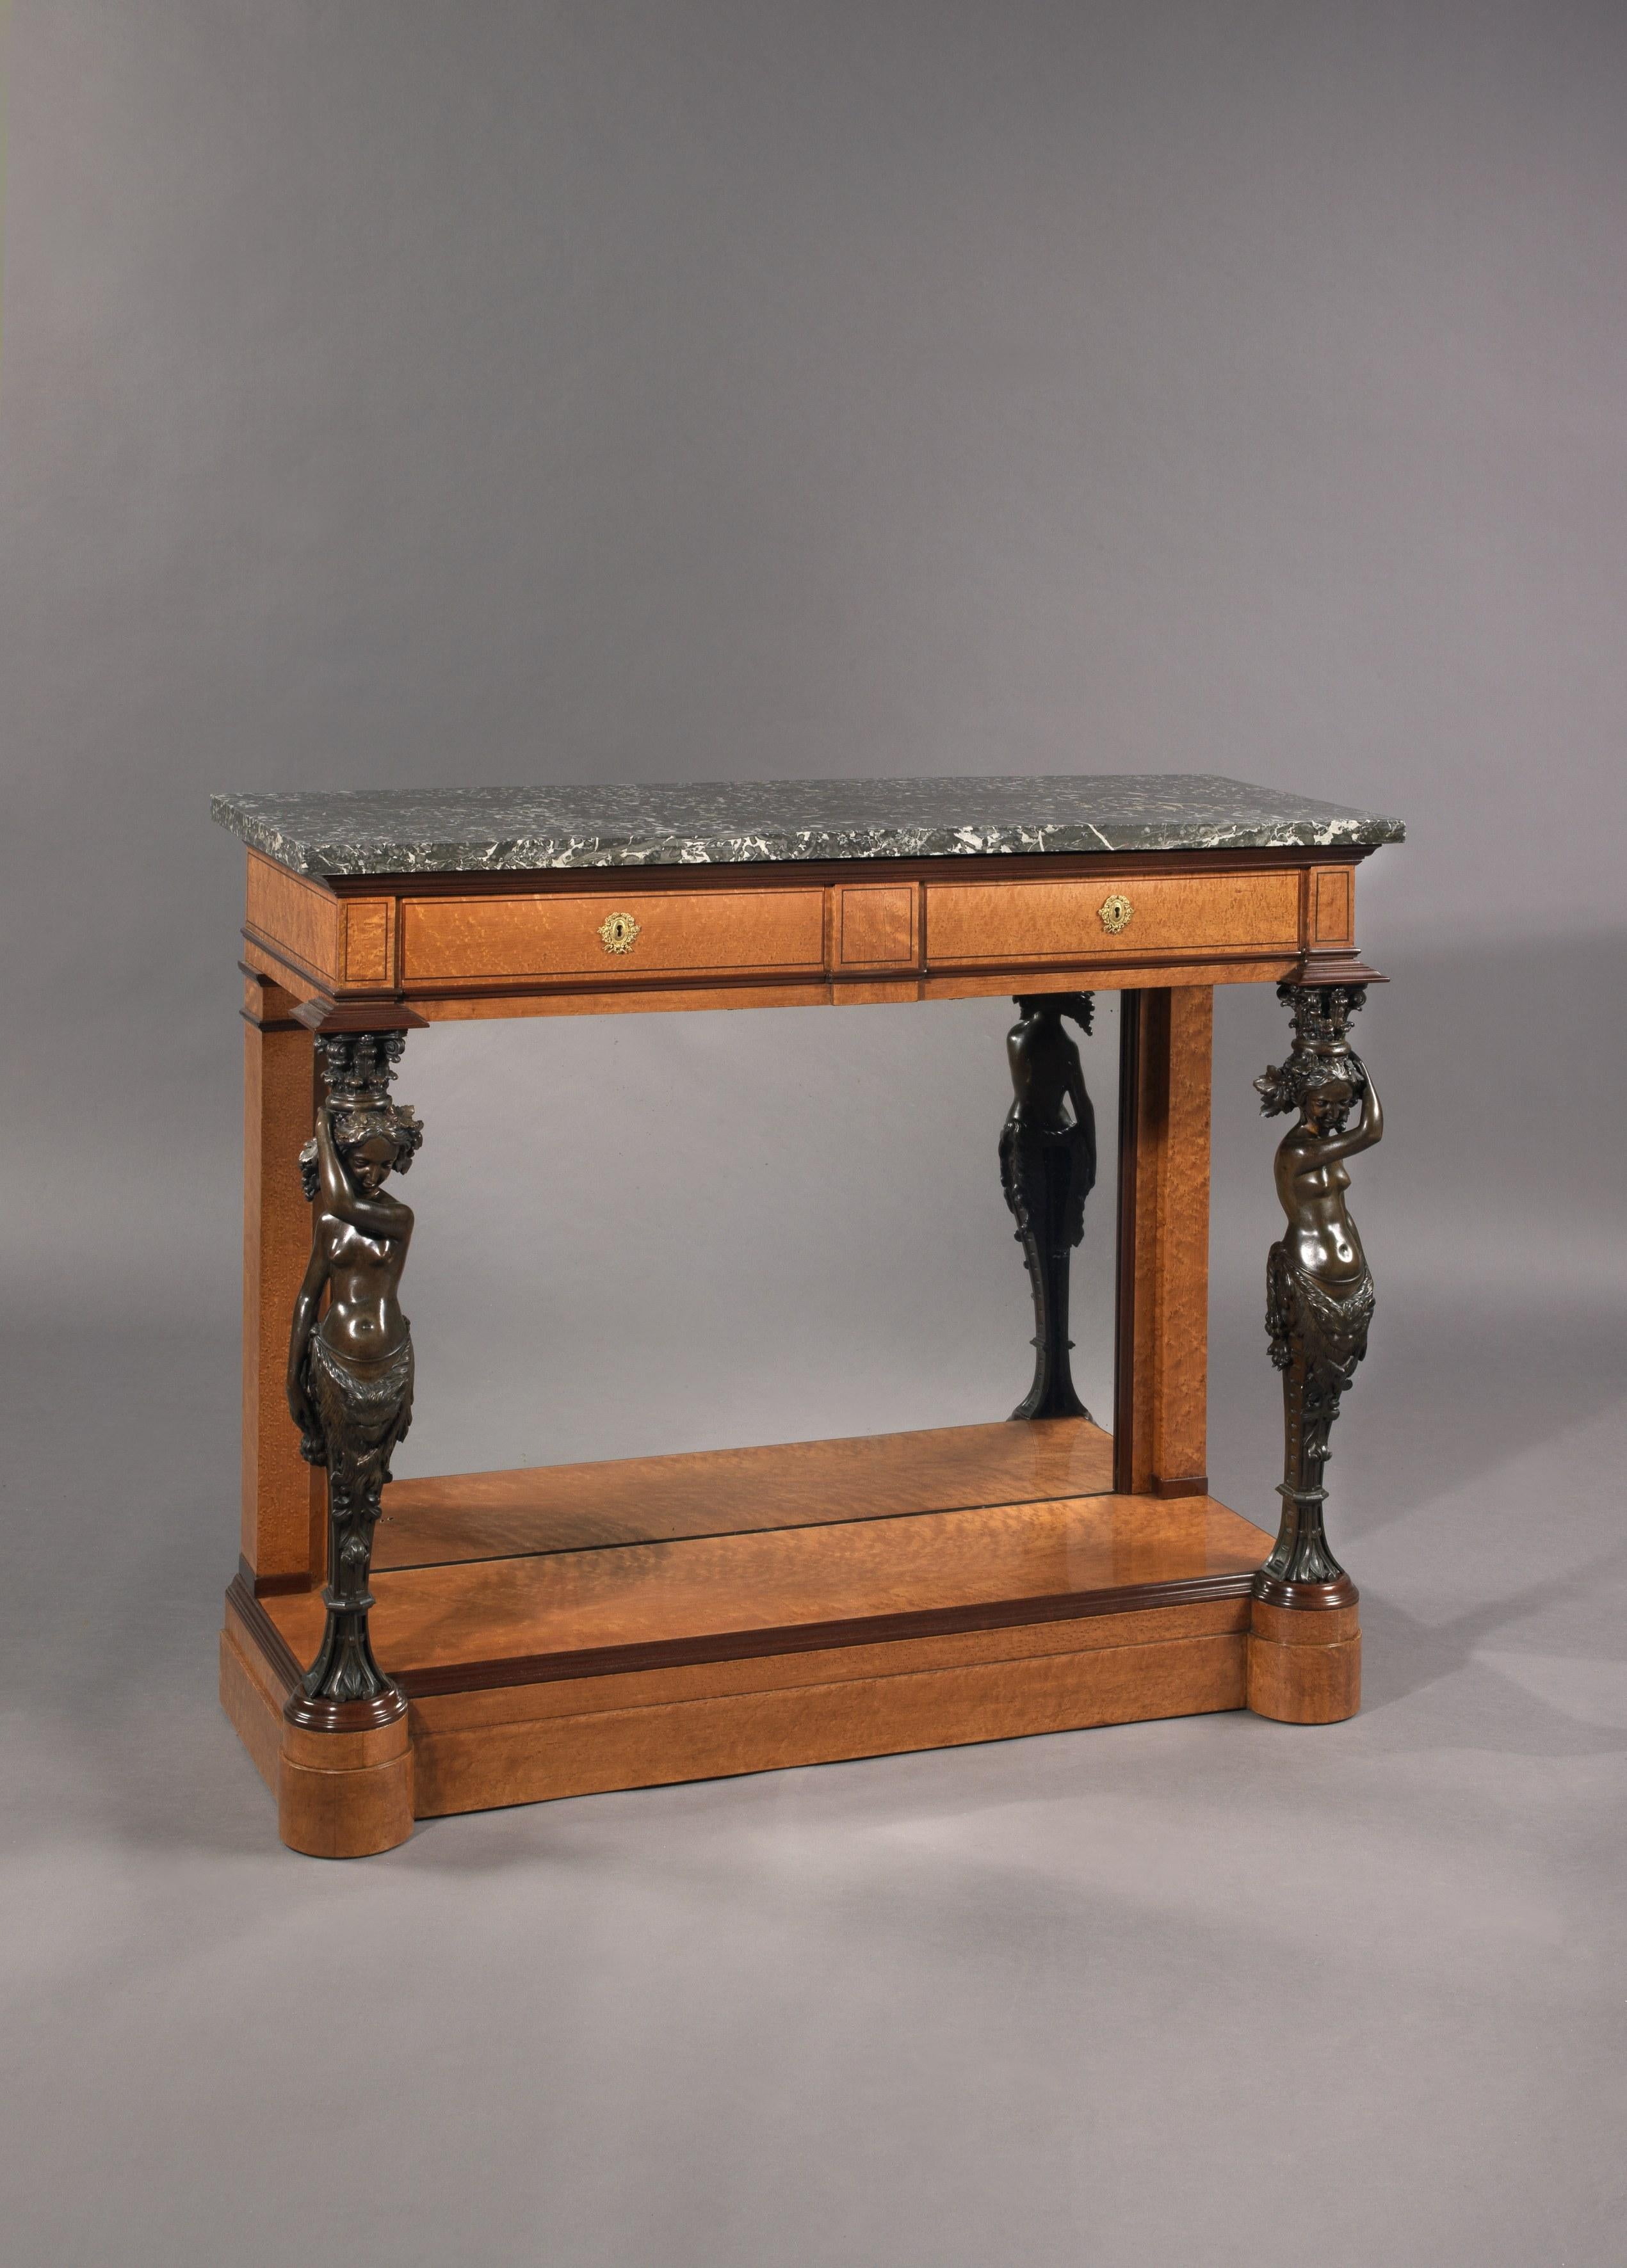 A highly important restoration period maple and Amaranth veneered console table with patinated bronze female term supports, made for King Louis-Philippe by Jean-Christophe Fischer.

French, circa 1830. 

This rare console table has a rectangular